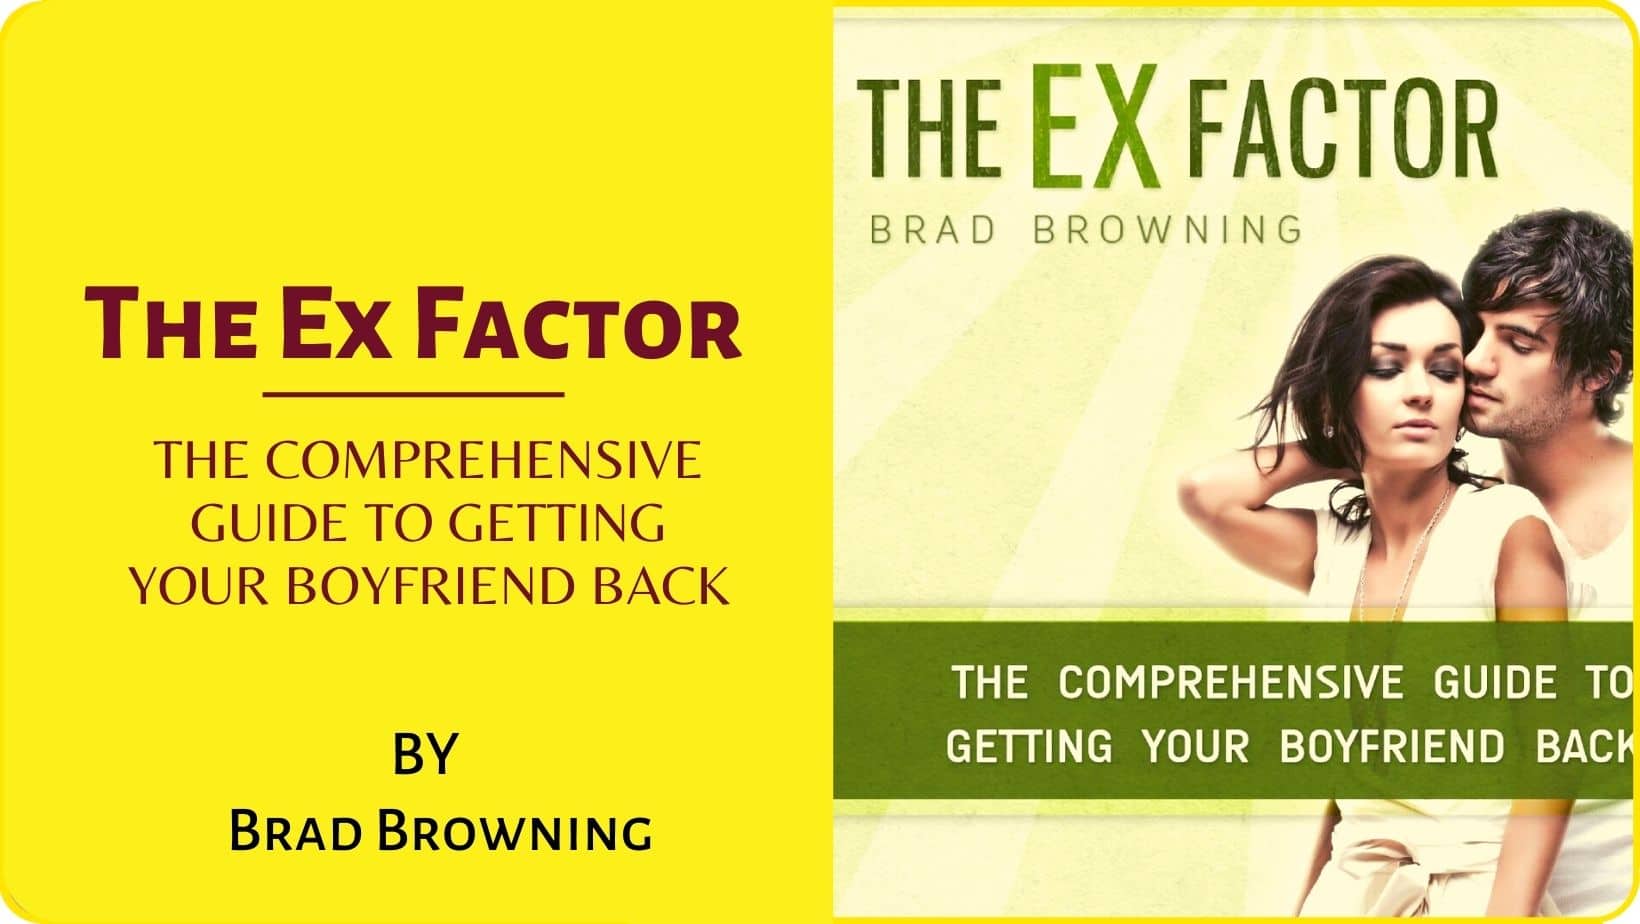 The Ex Factor by Brad Browning